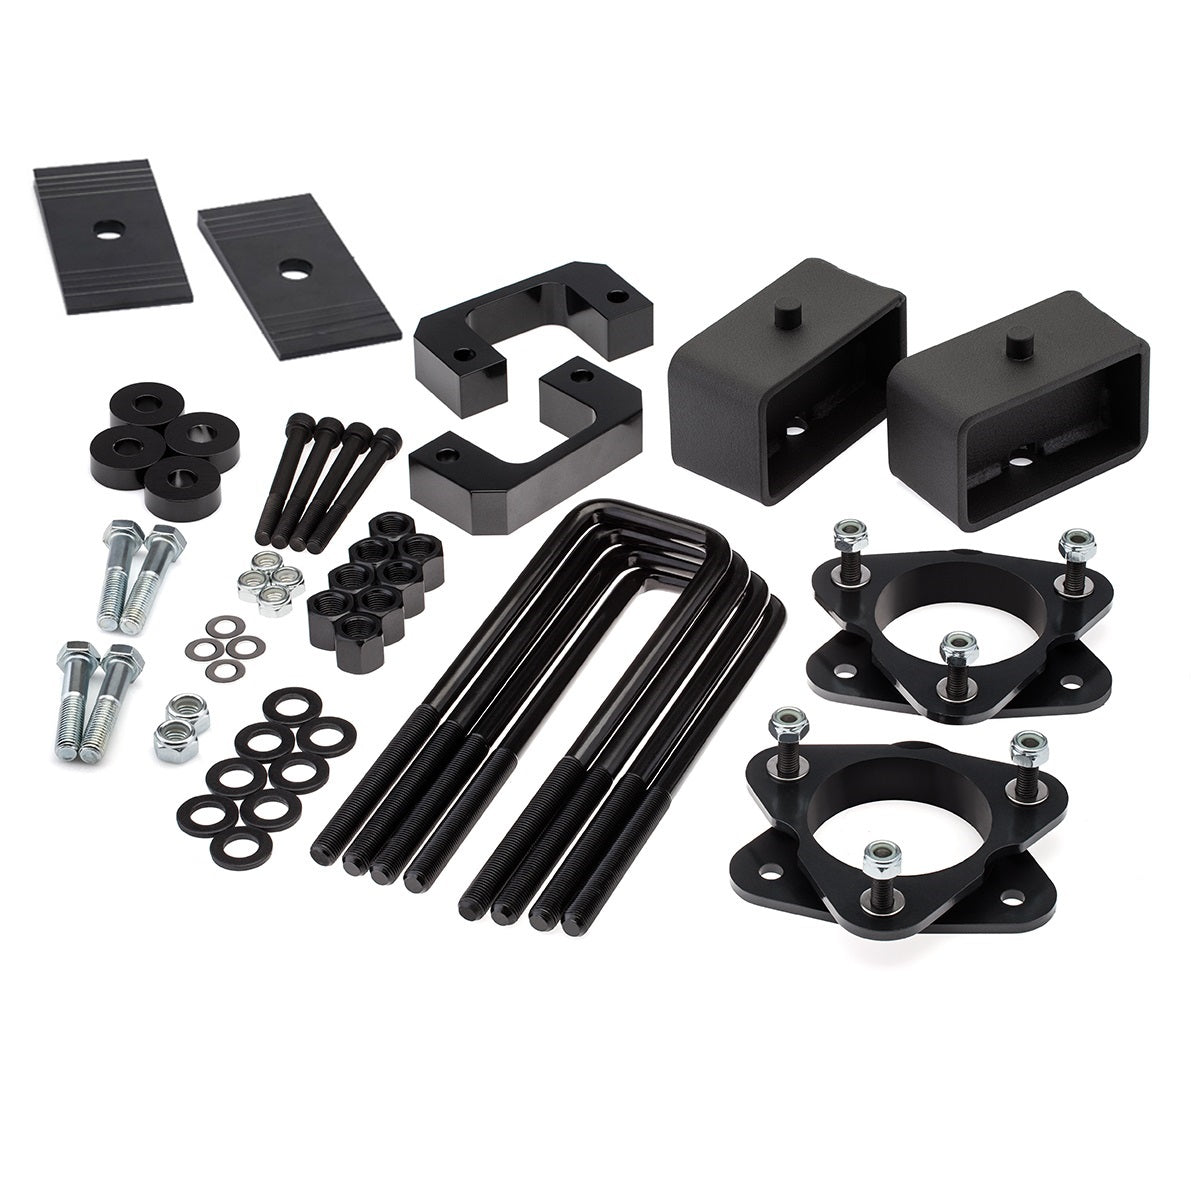 2007-2021 Chevy Silverado 1500 Full Lift Kit with Shims and Differential Drop Kit